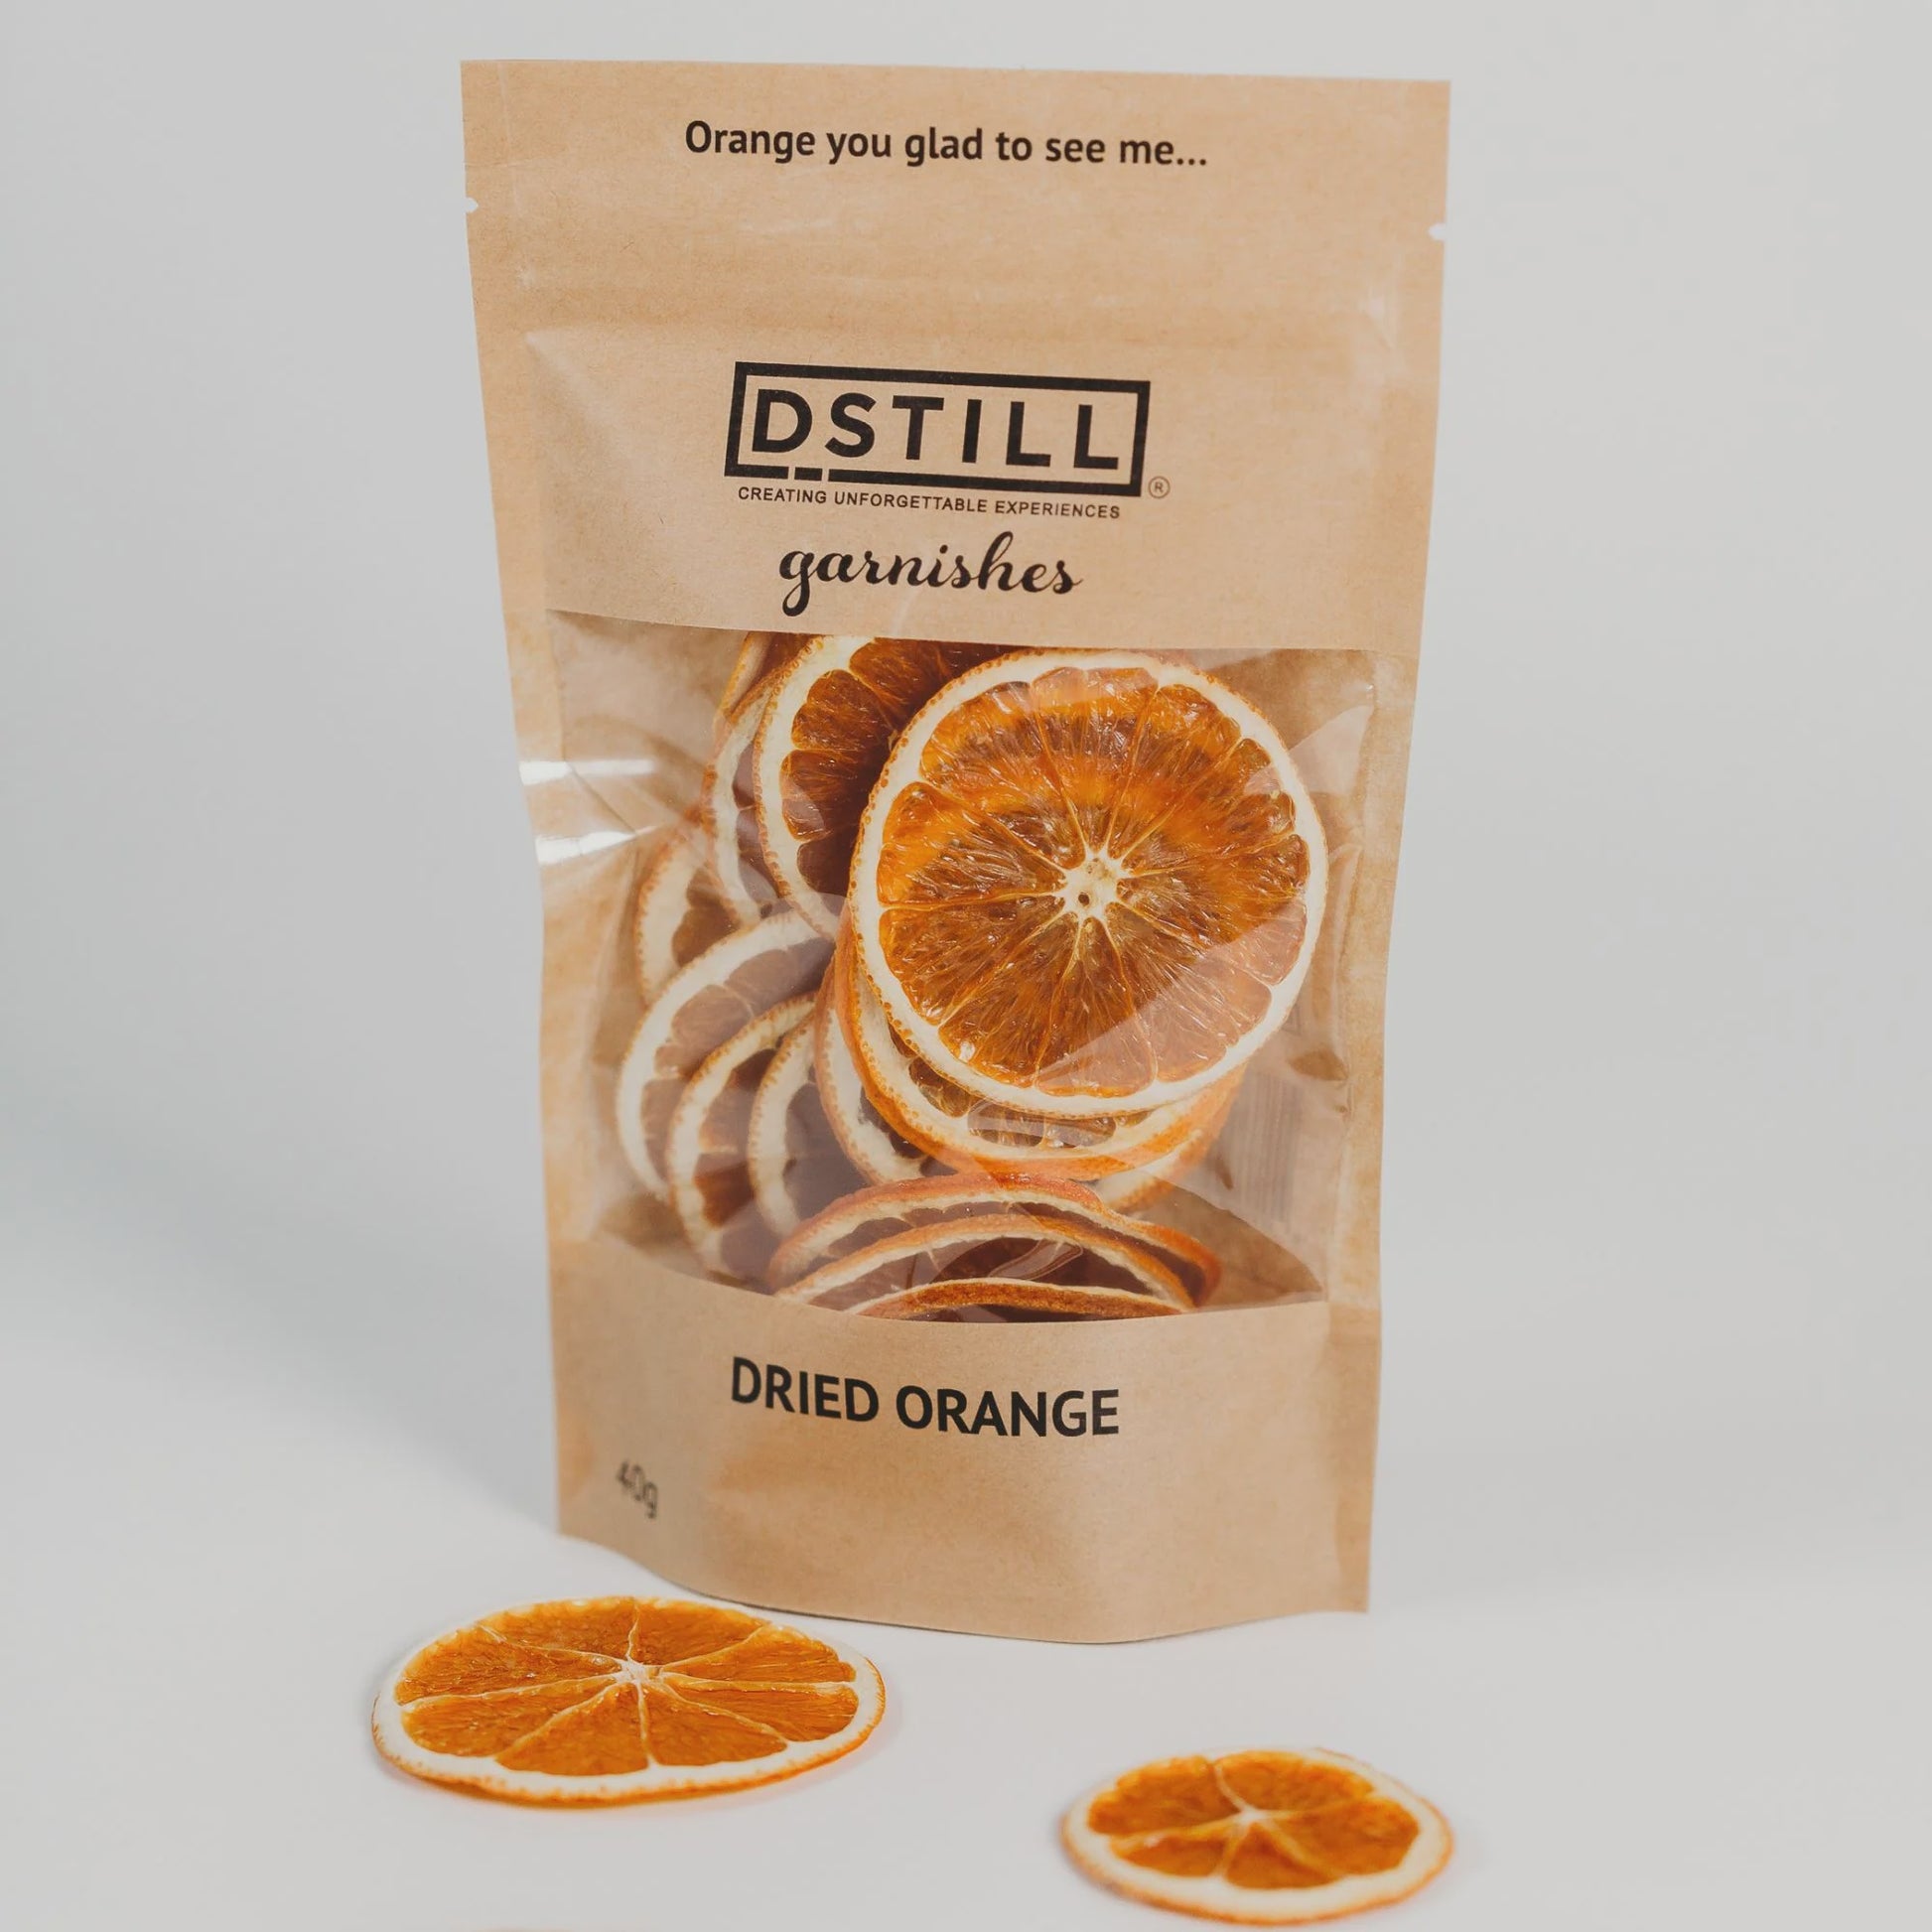 Handmade with care, our dried orange cocktail garnishes are of the highest quality, ensuring that every drink (and dessert) is elevated to the next level. Order yours today and enjoy the versatility and beauty of these delightful dried orange slices!